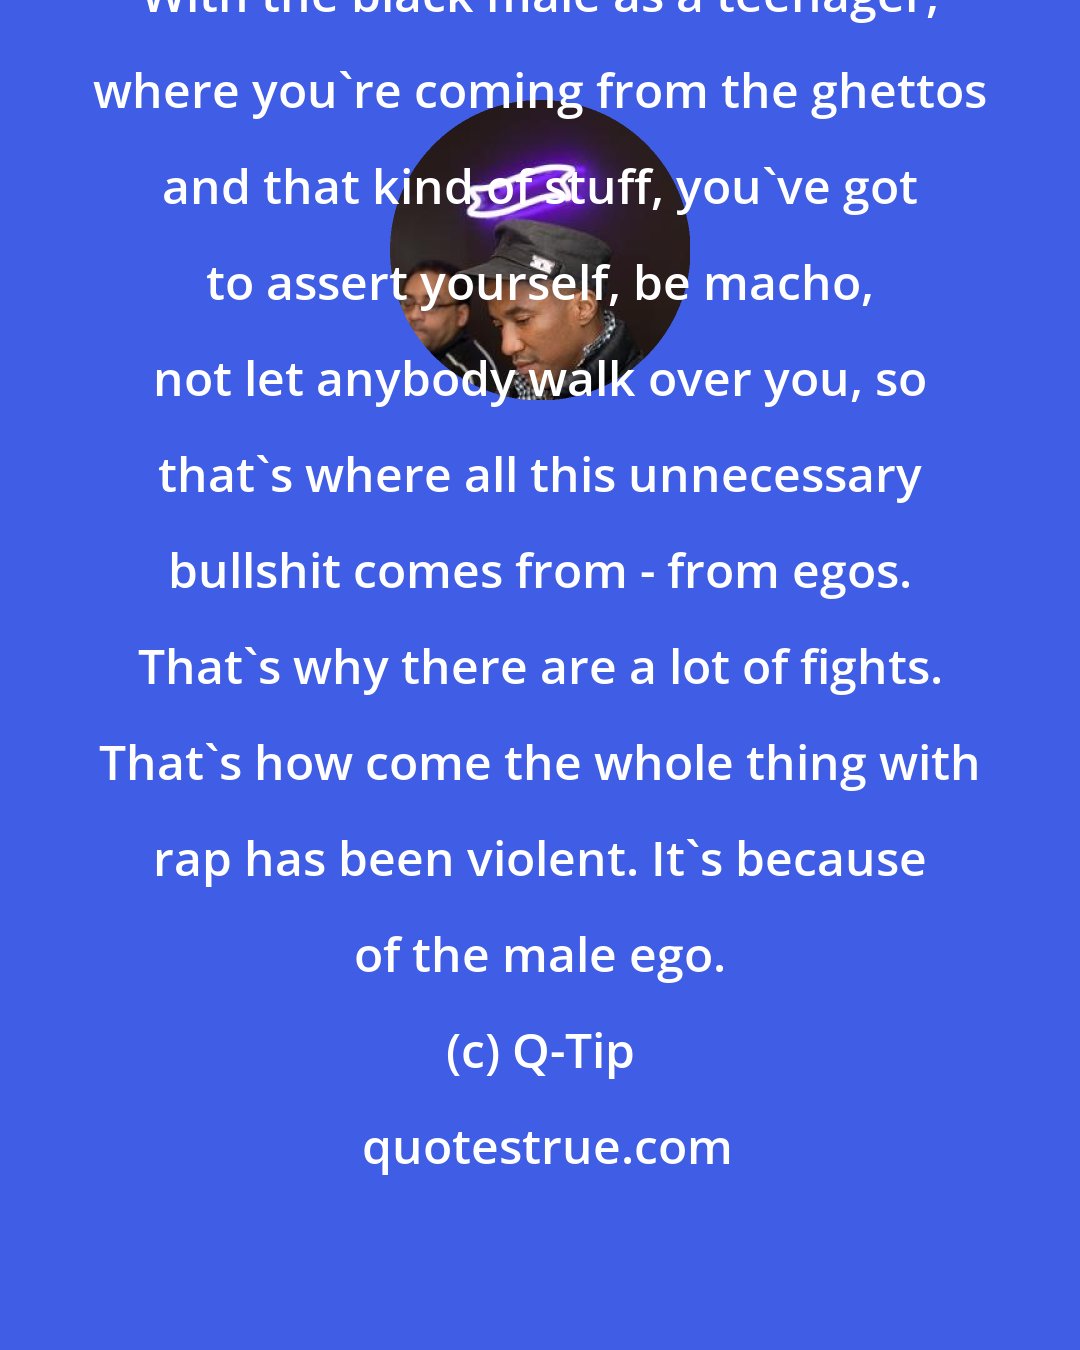 Q-Tip: With the black male as a teenager, where you're coming from the ghettos and that kind of stuff, you've got to assert yourself, be macho, not let anybody walk over you, so that's where all this unnecessary bullshit comes from - from egos. That's why there are a lot of fights. That's how come the whole thing with rap has been violent. It's because of the male ego.